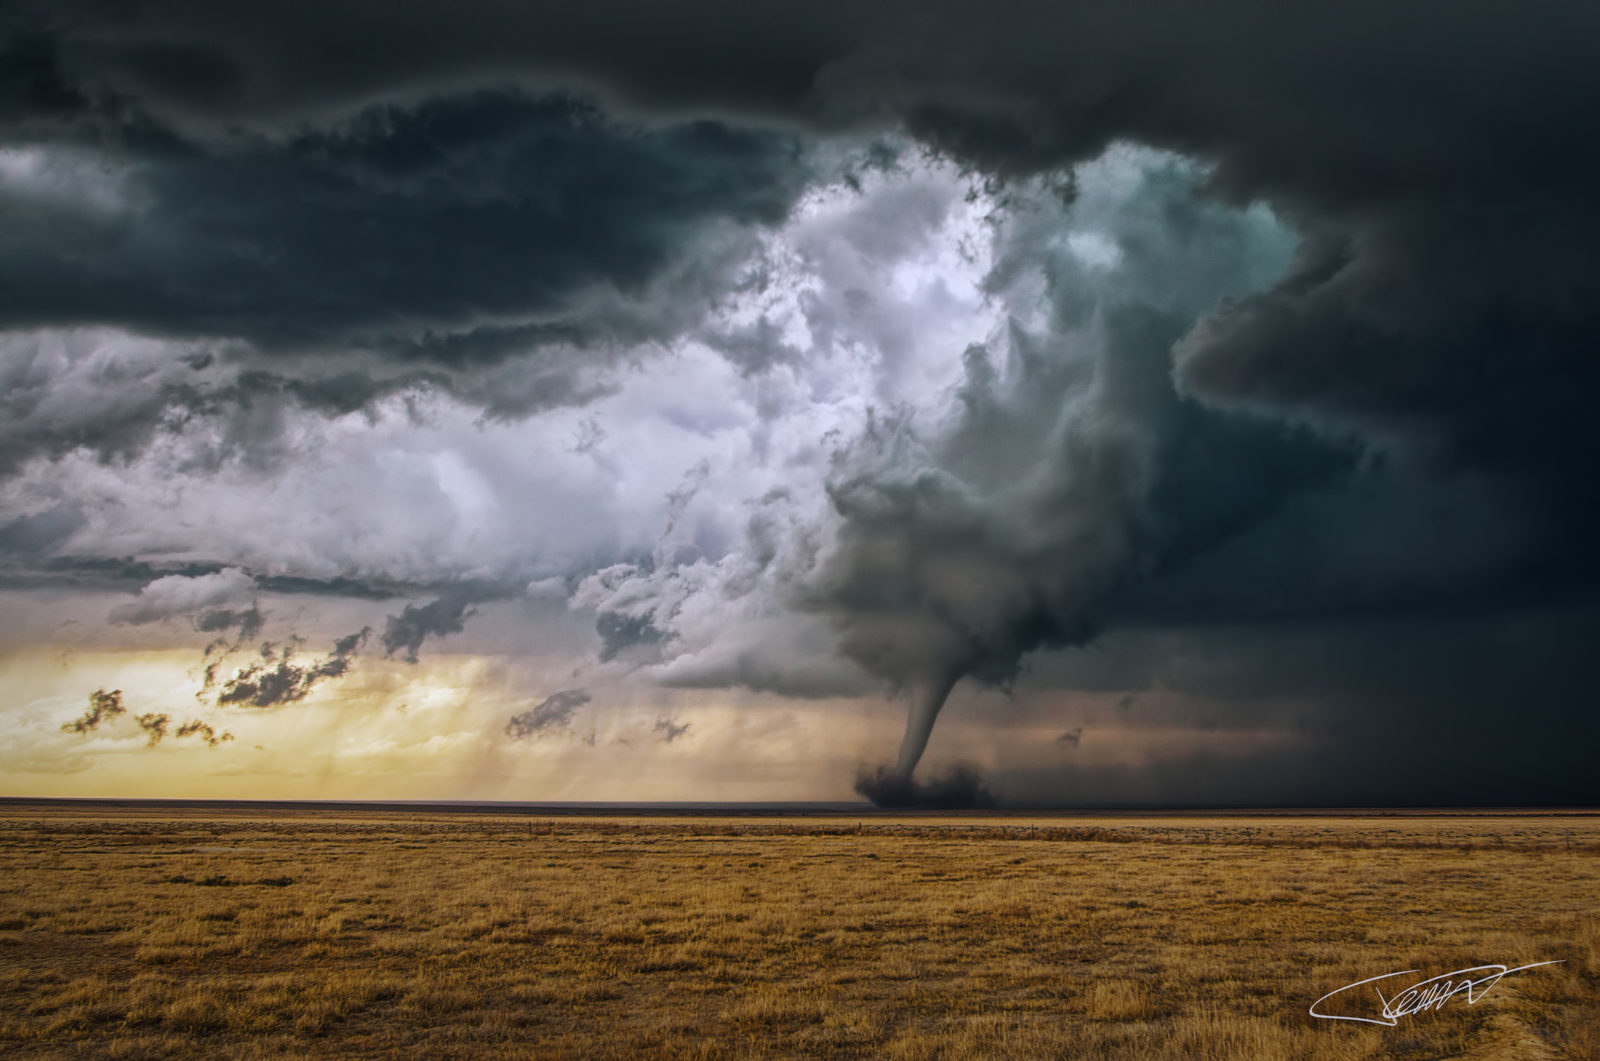 Congratulations to Jeff Niederstadt for winning the recent Stormscapes Assignment with the image, “This Ain’t Kansas.”